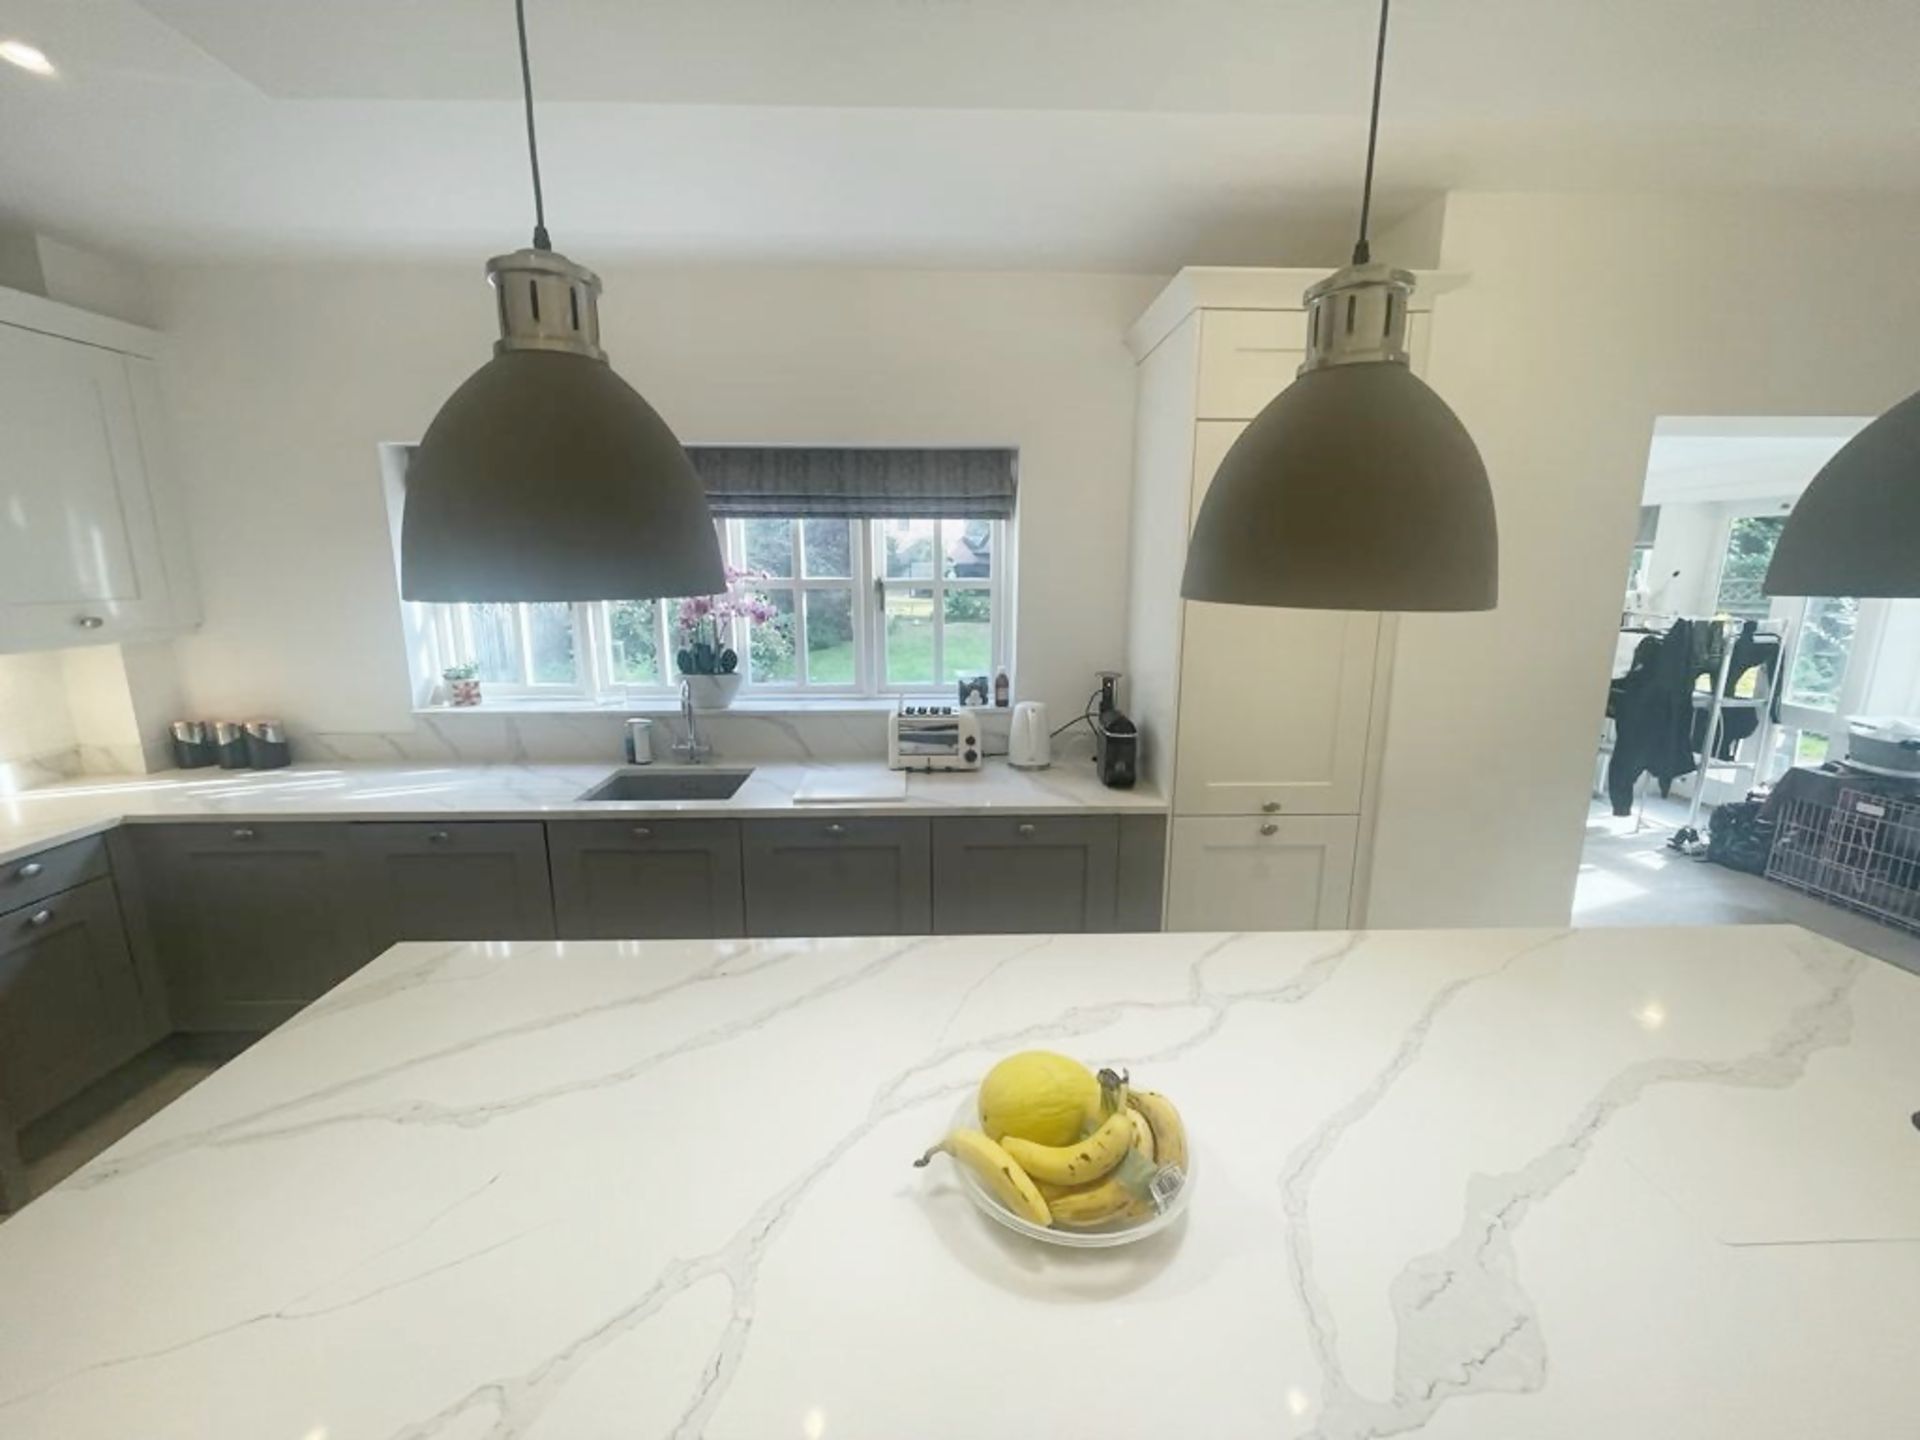 1 x SIEMATIC Bespoke Shaker-style Fitted Kitchen, Utility Room, Appliances & Modern Quartz Surfaces - Image 21 of 99